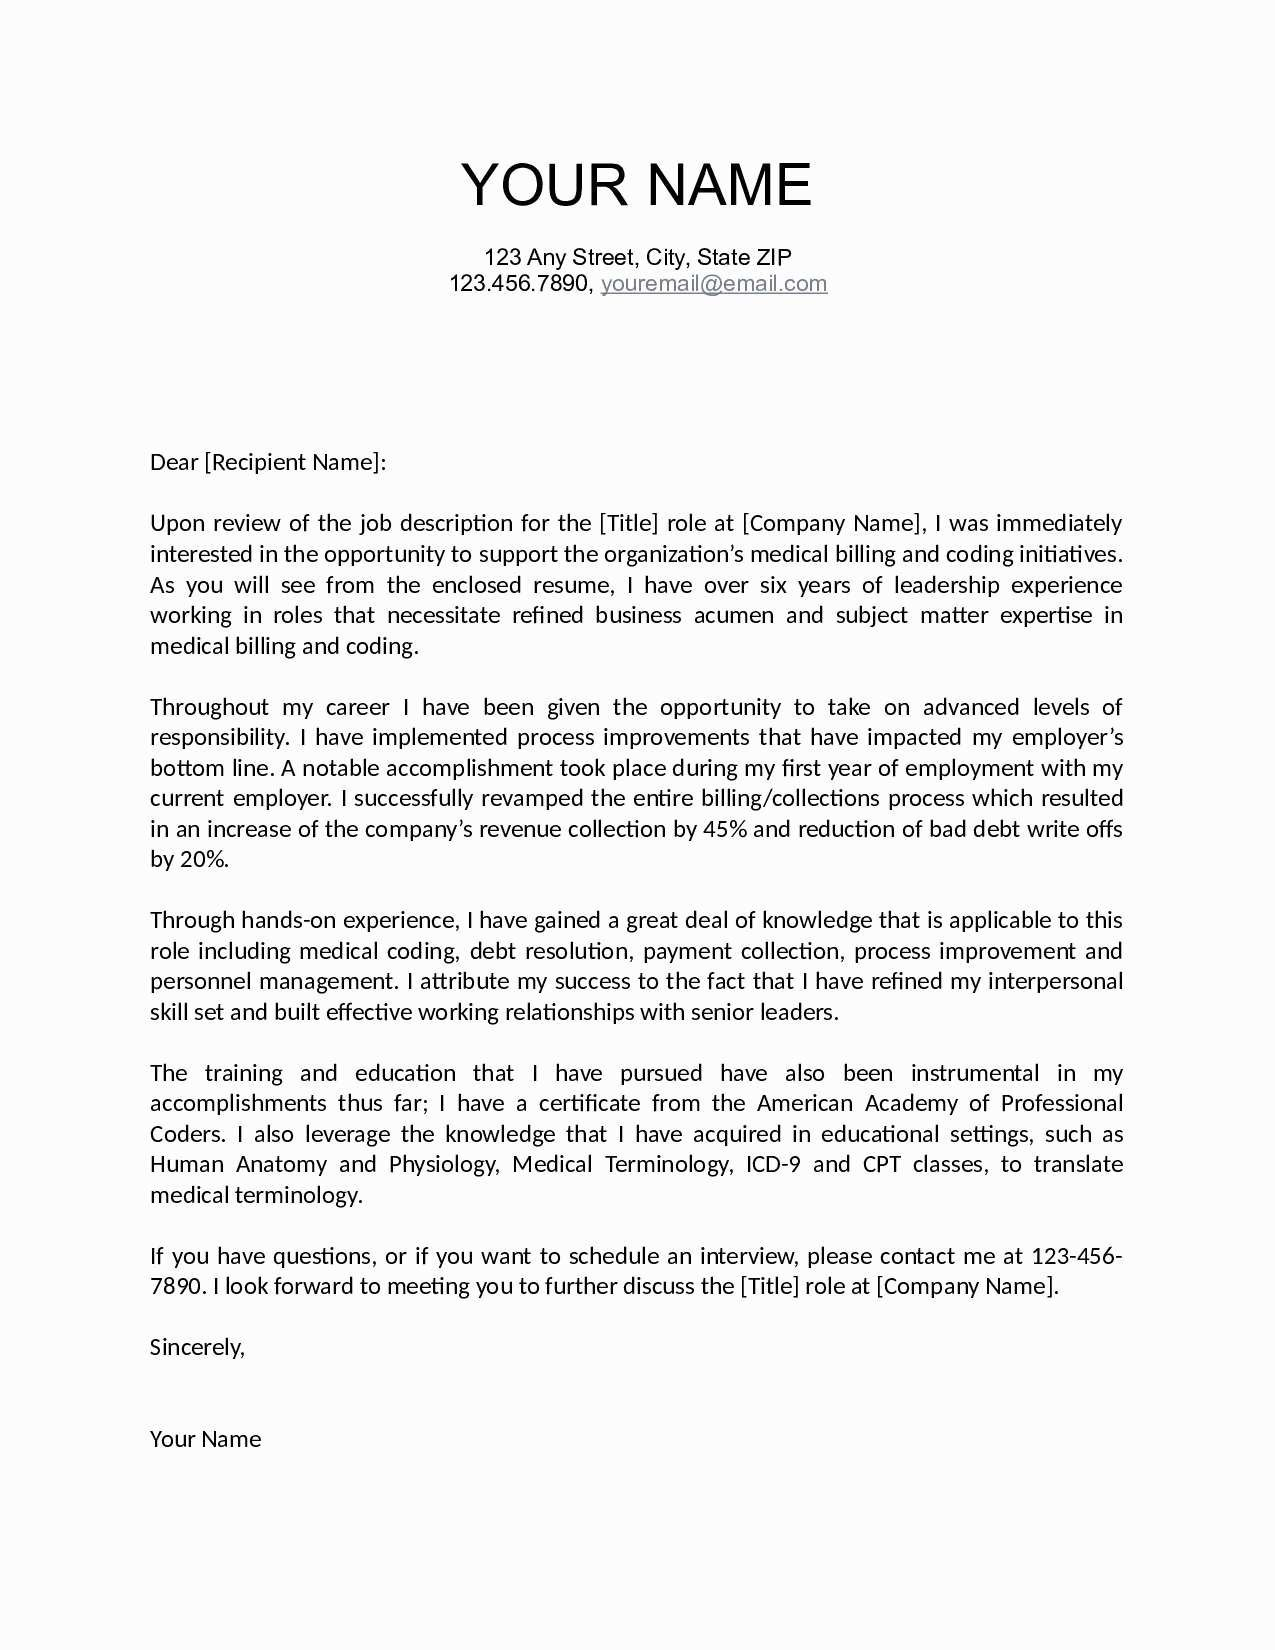 Welcome Letter Email Template - Cover Letter Resume Template New Resume Introduction Letter Fresh